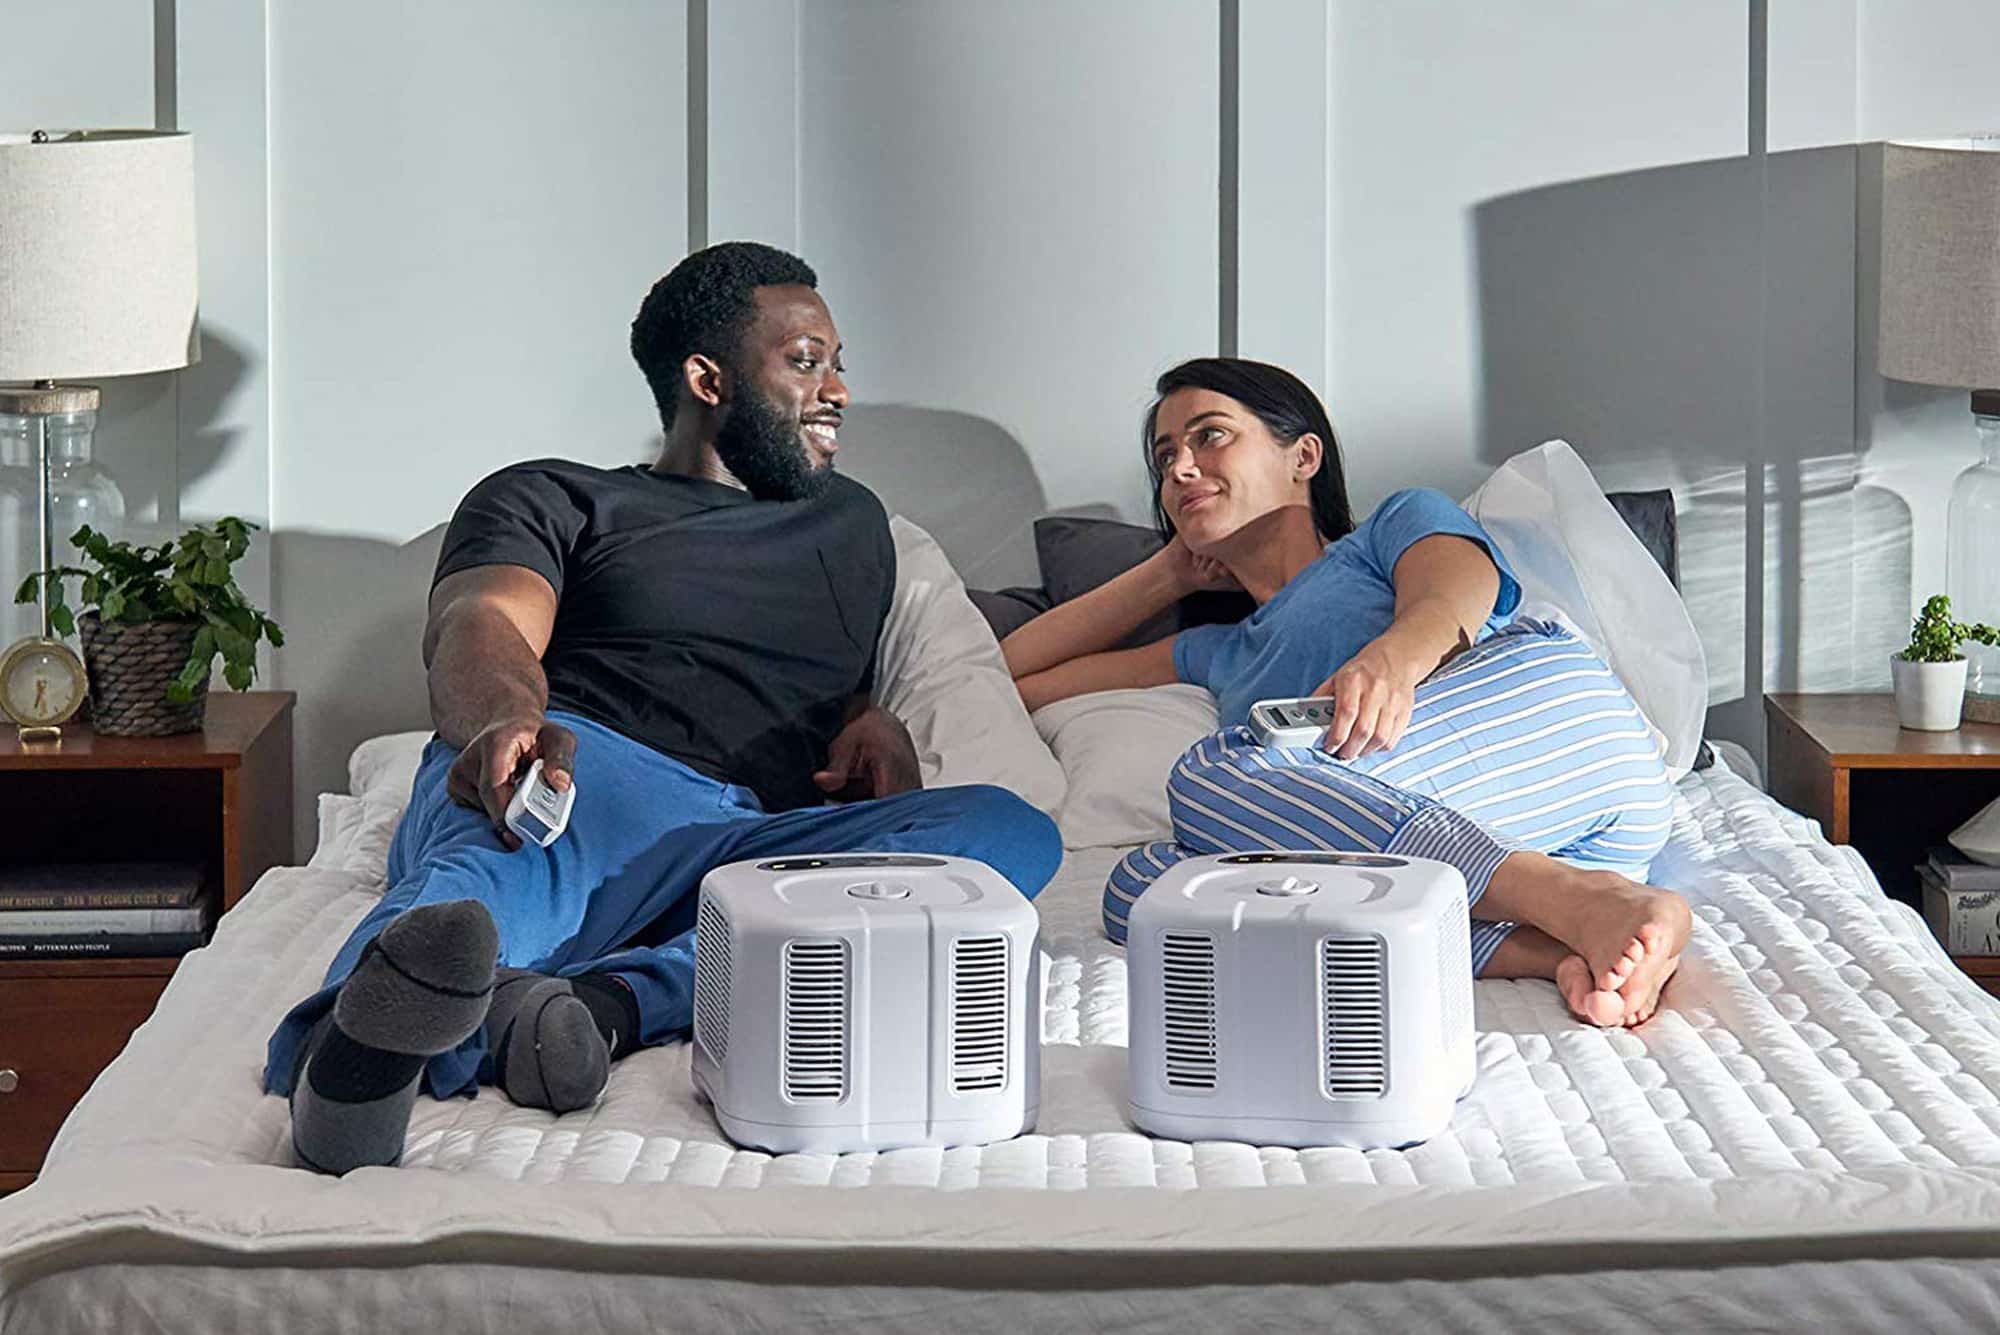 ooler vs chilipad - Chilipad Sleep System Review: Answer For Hot Night? - Terry Cralle